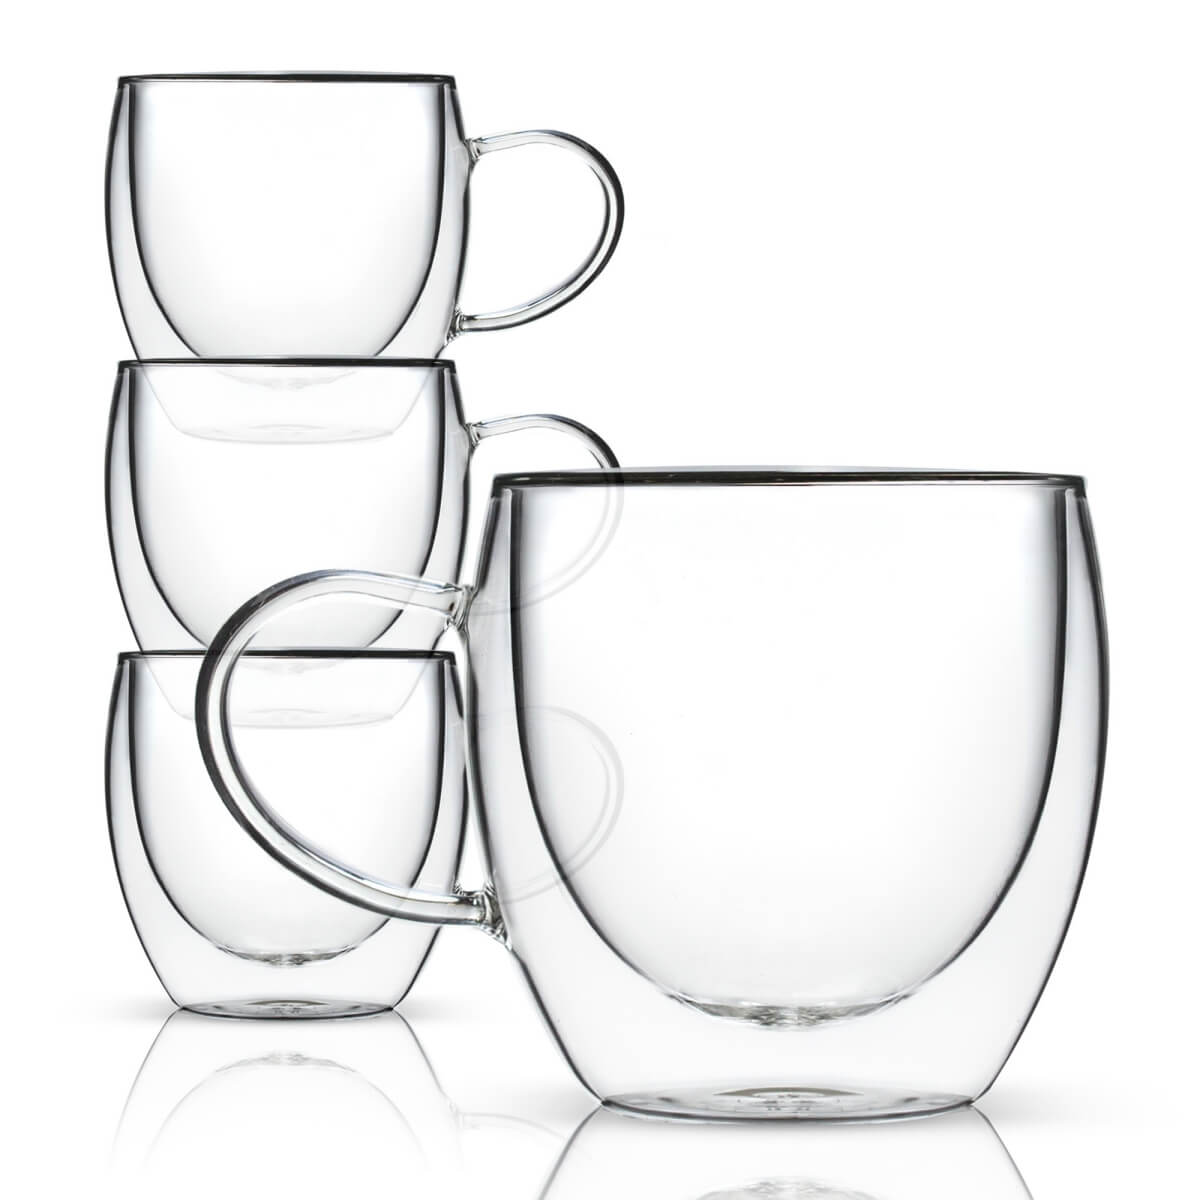 8 oz. Double Walled Glasses, Set of 2 (#CUP08)